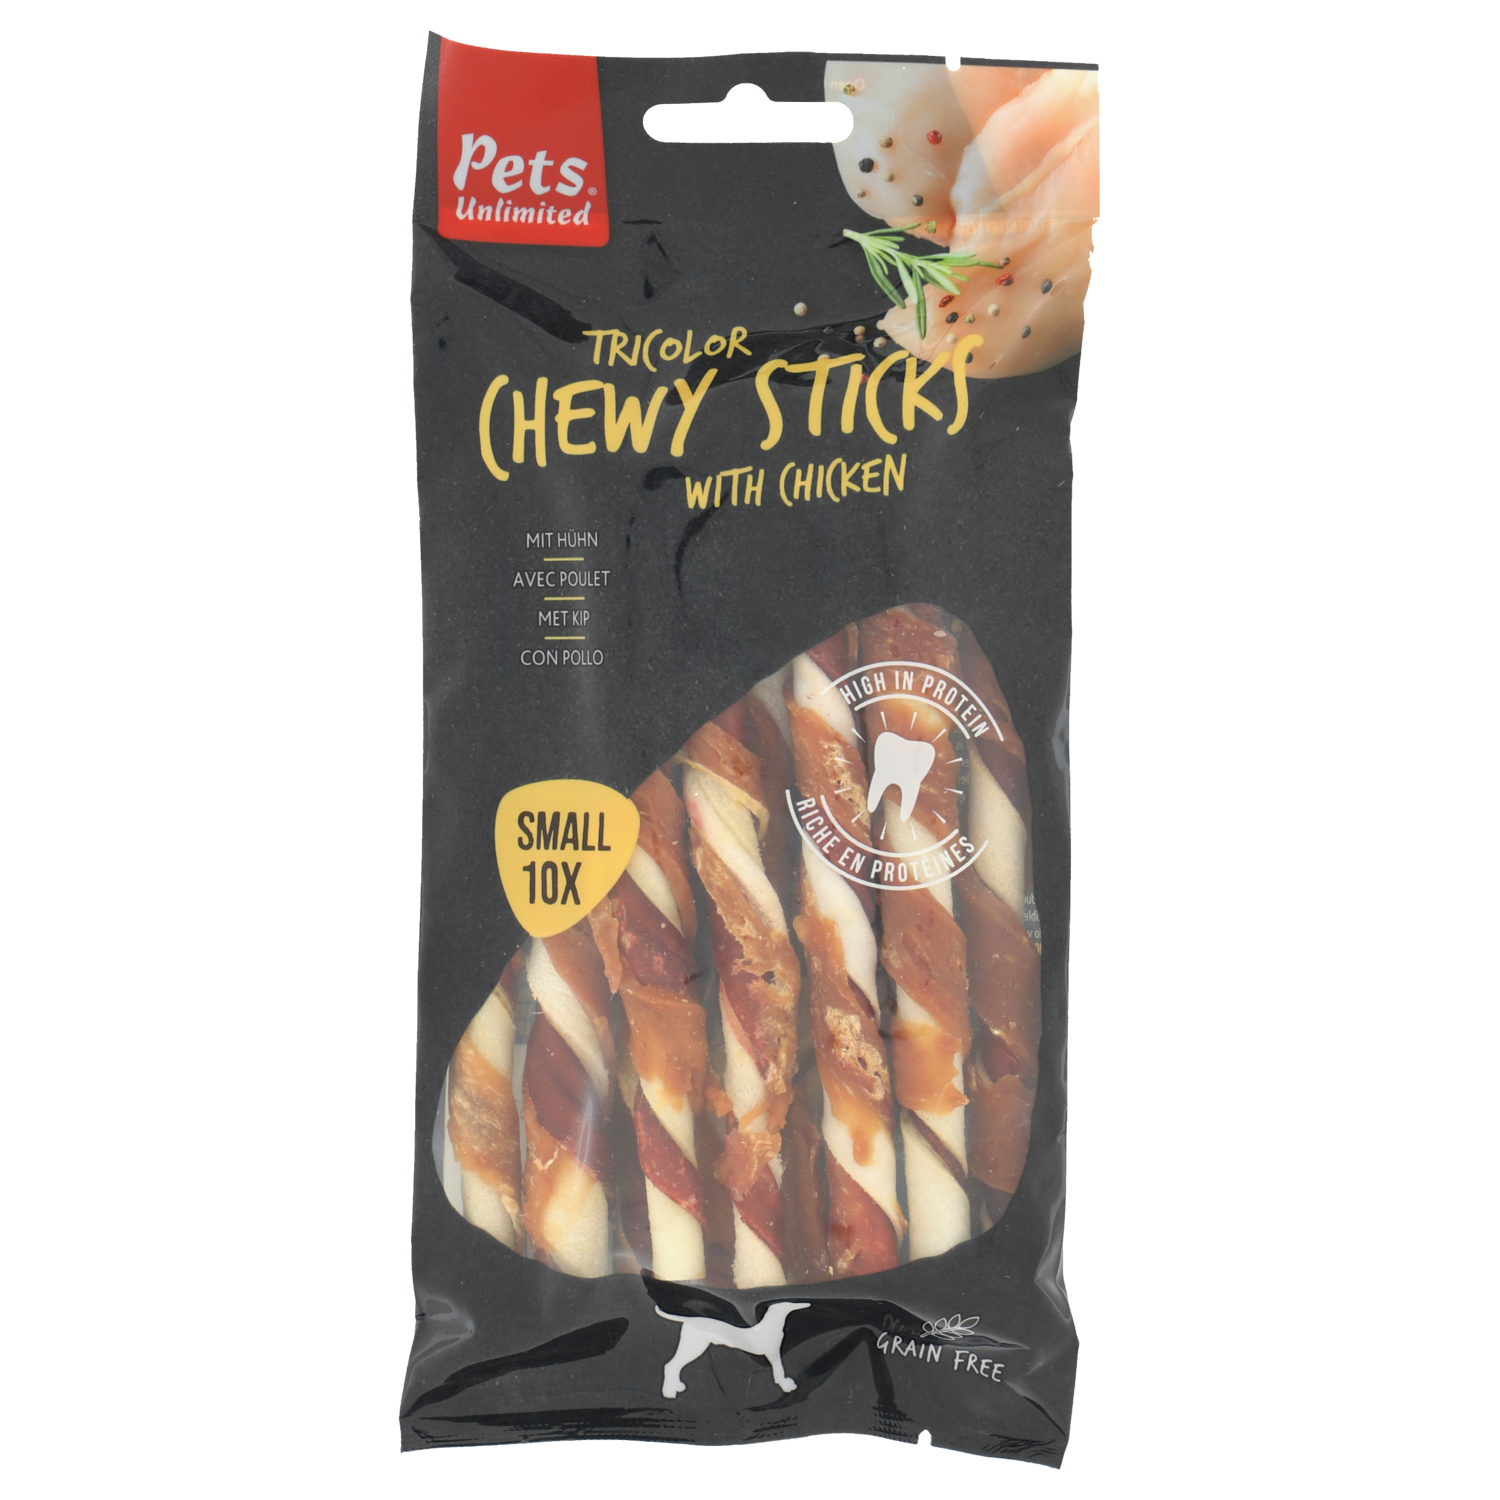 Tricolor Chewy Sticks Small 10st